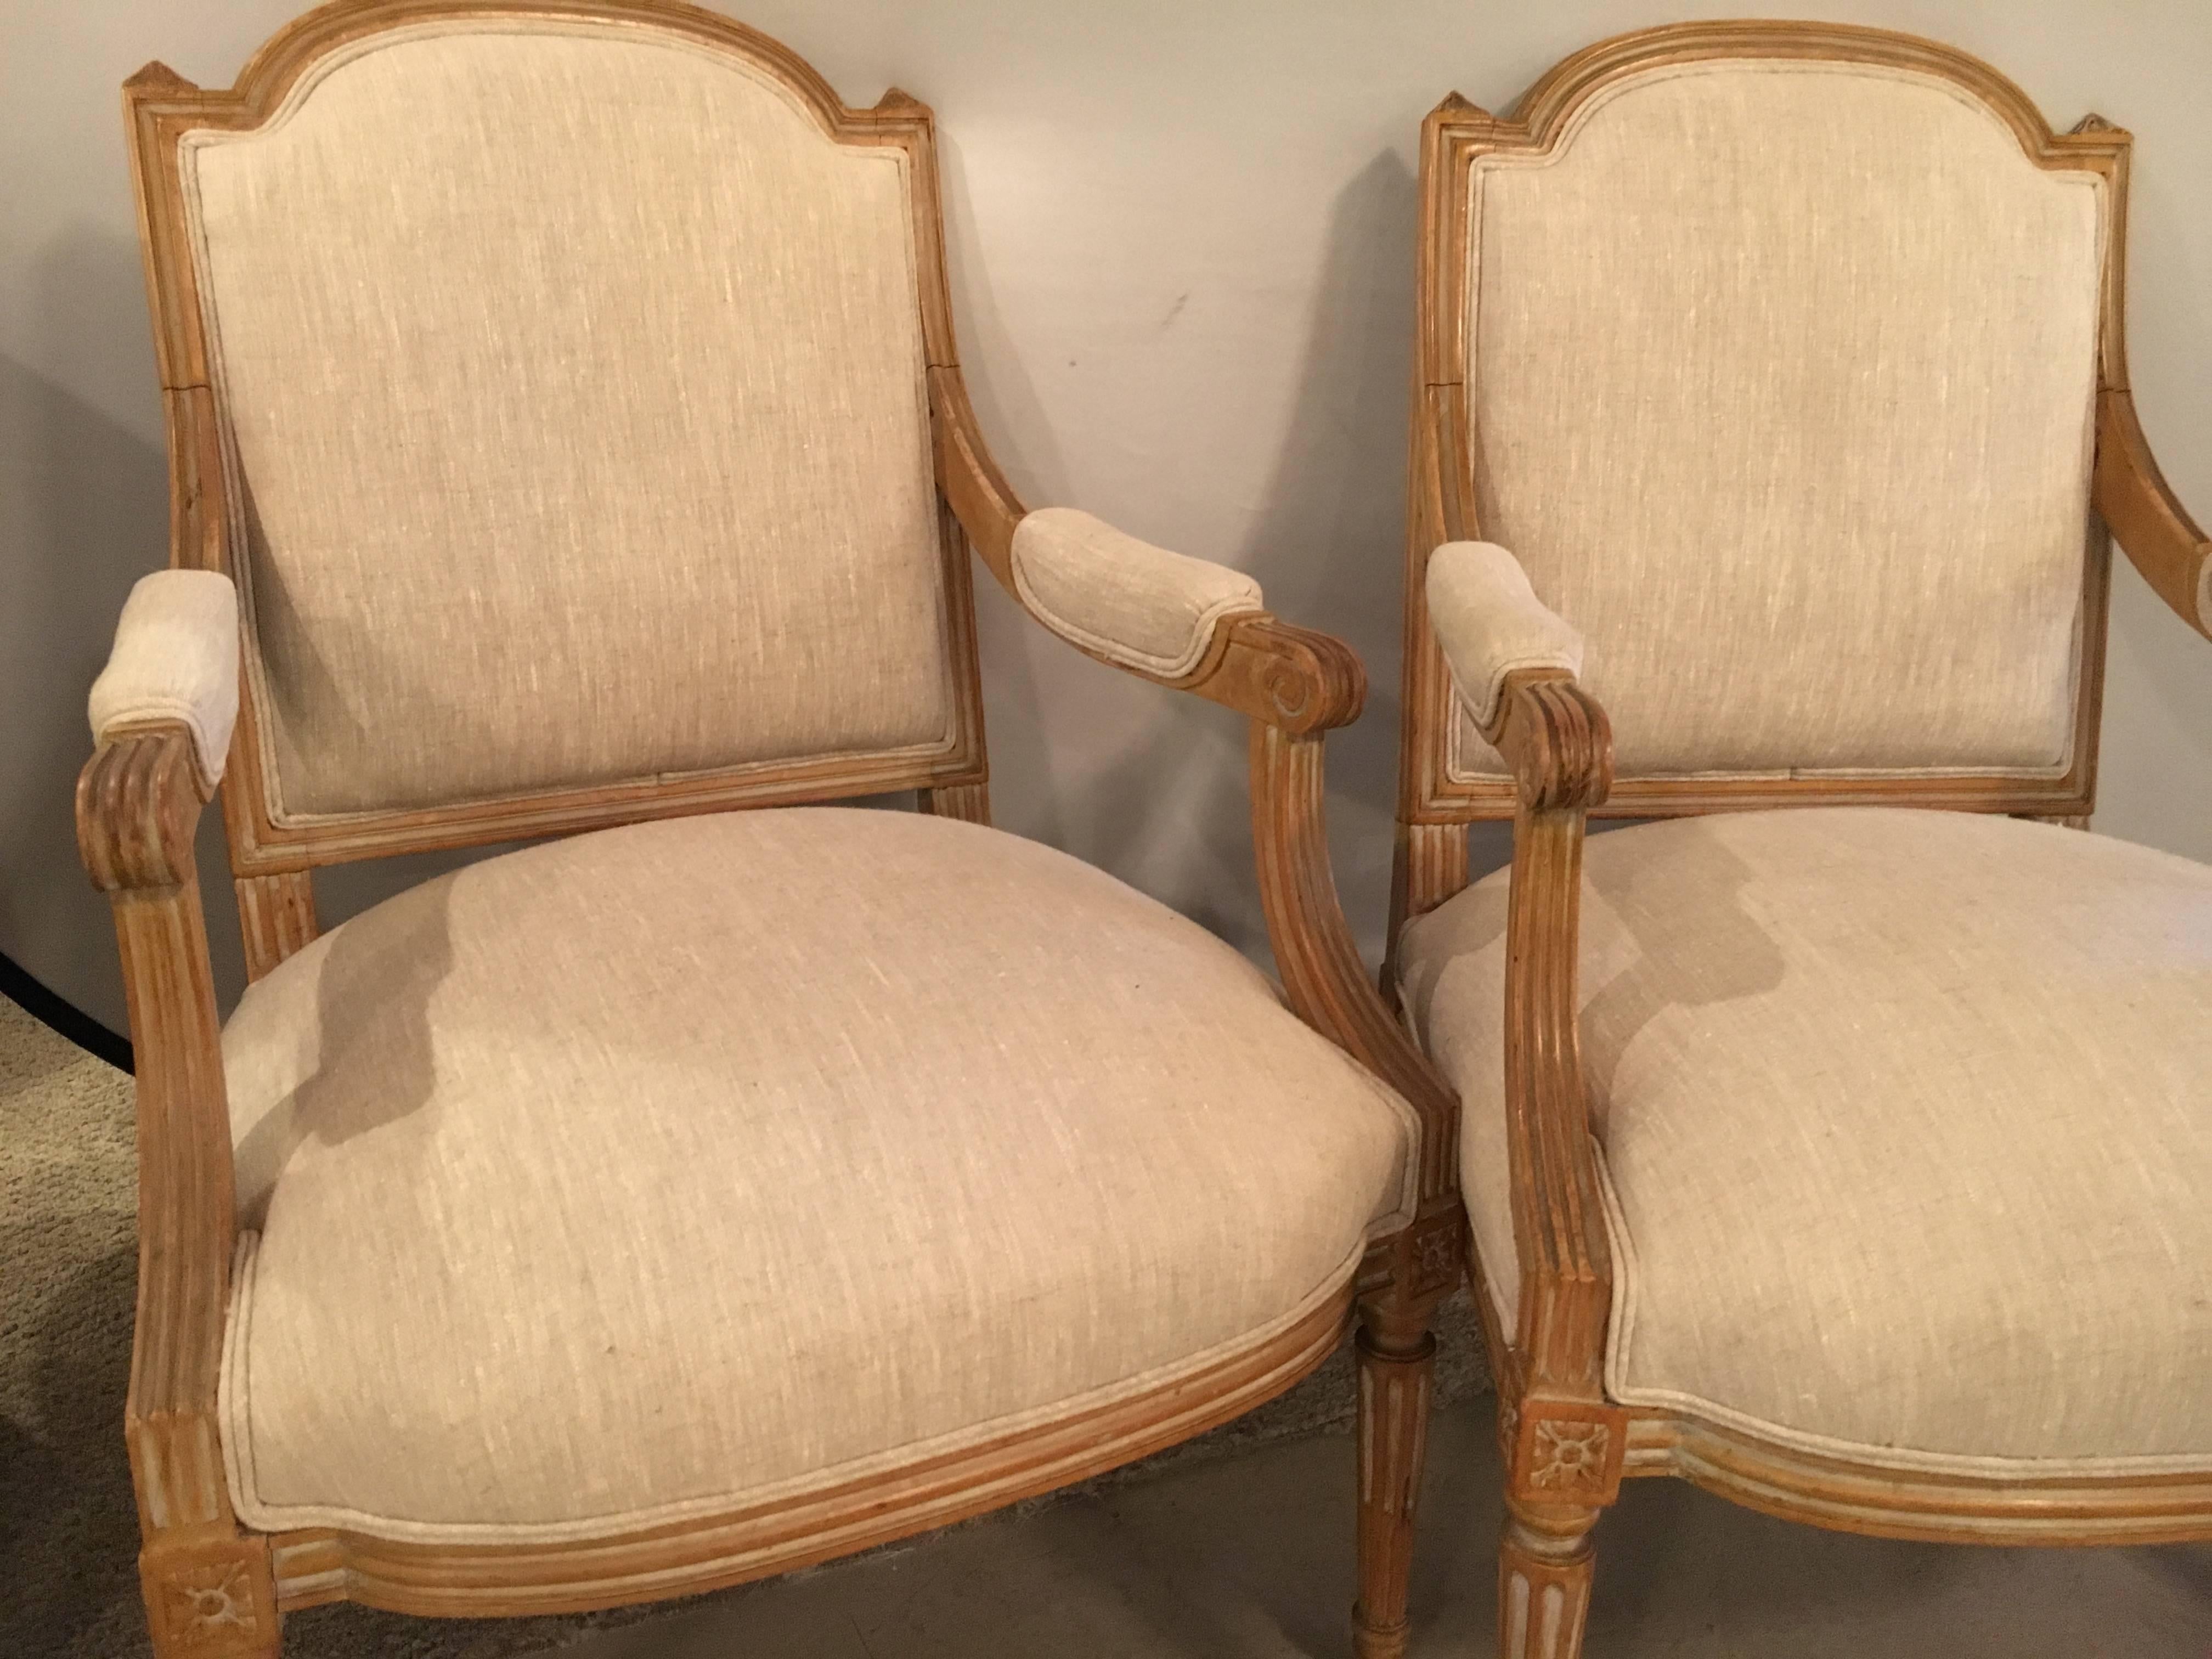 A pair of Maison Jansen Louis XVI style Fauteuils or armchairs. A finely detailed pair of pickled finish open armchairs in the Louis XVI fashion. Each having new fabric. The wide squarish backrests supported by an overstuffed very comfortable seat